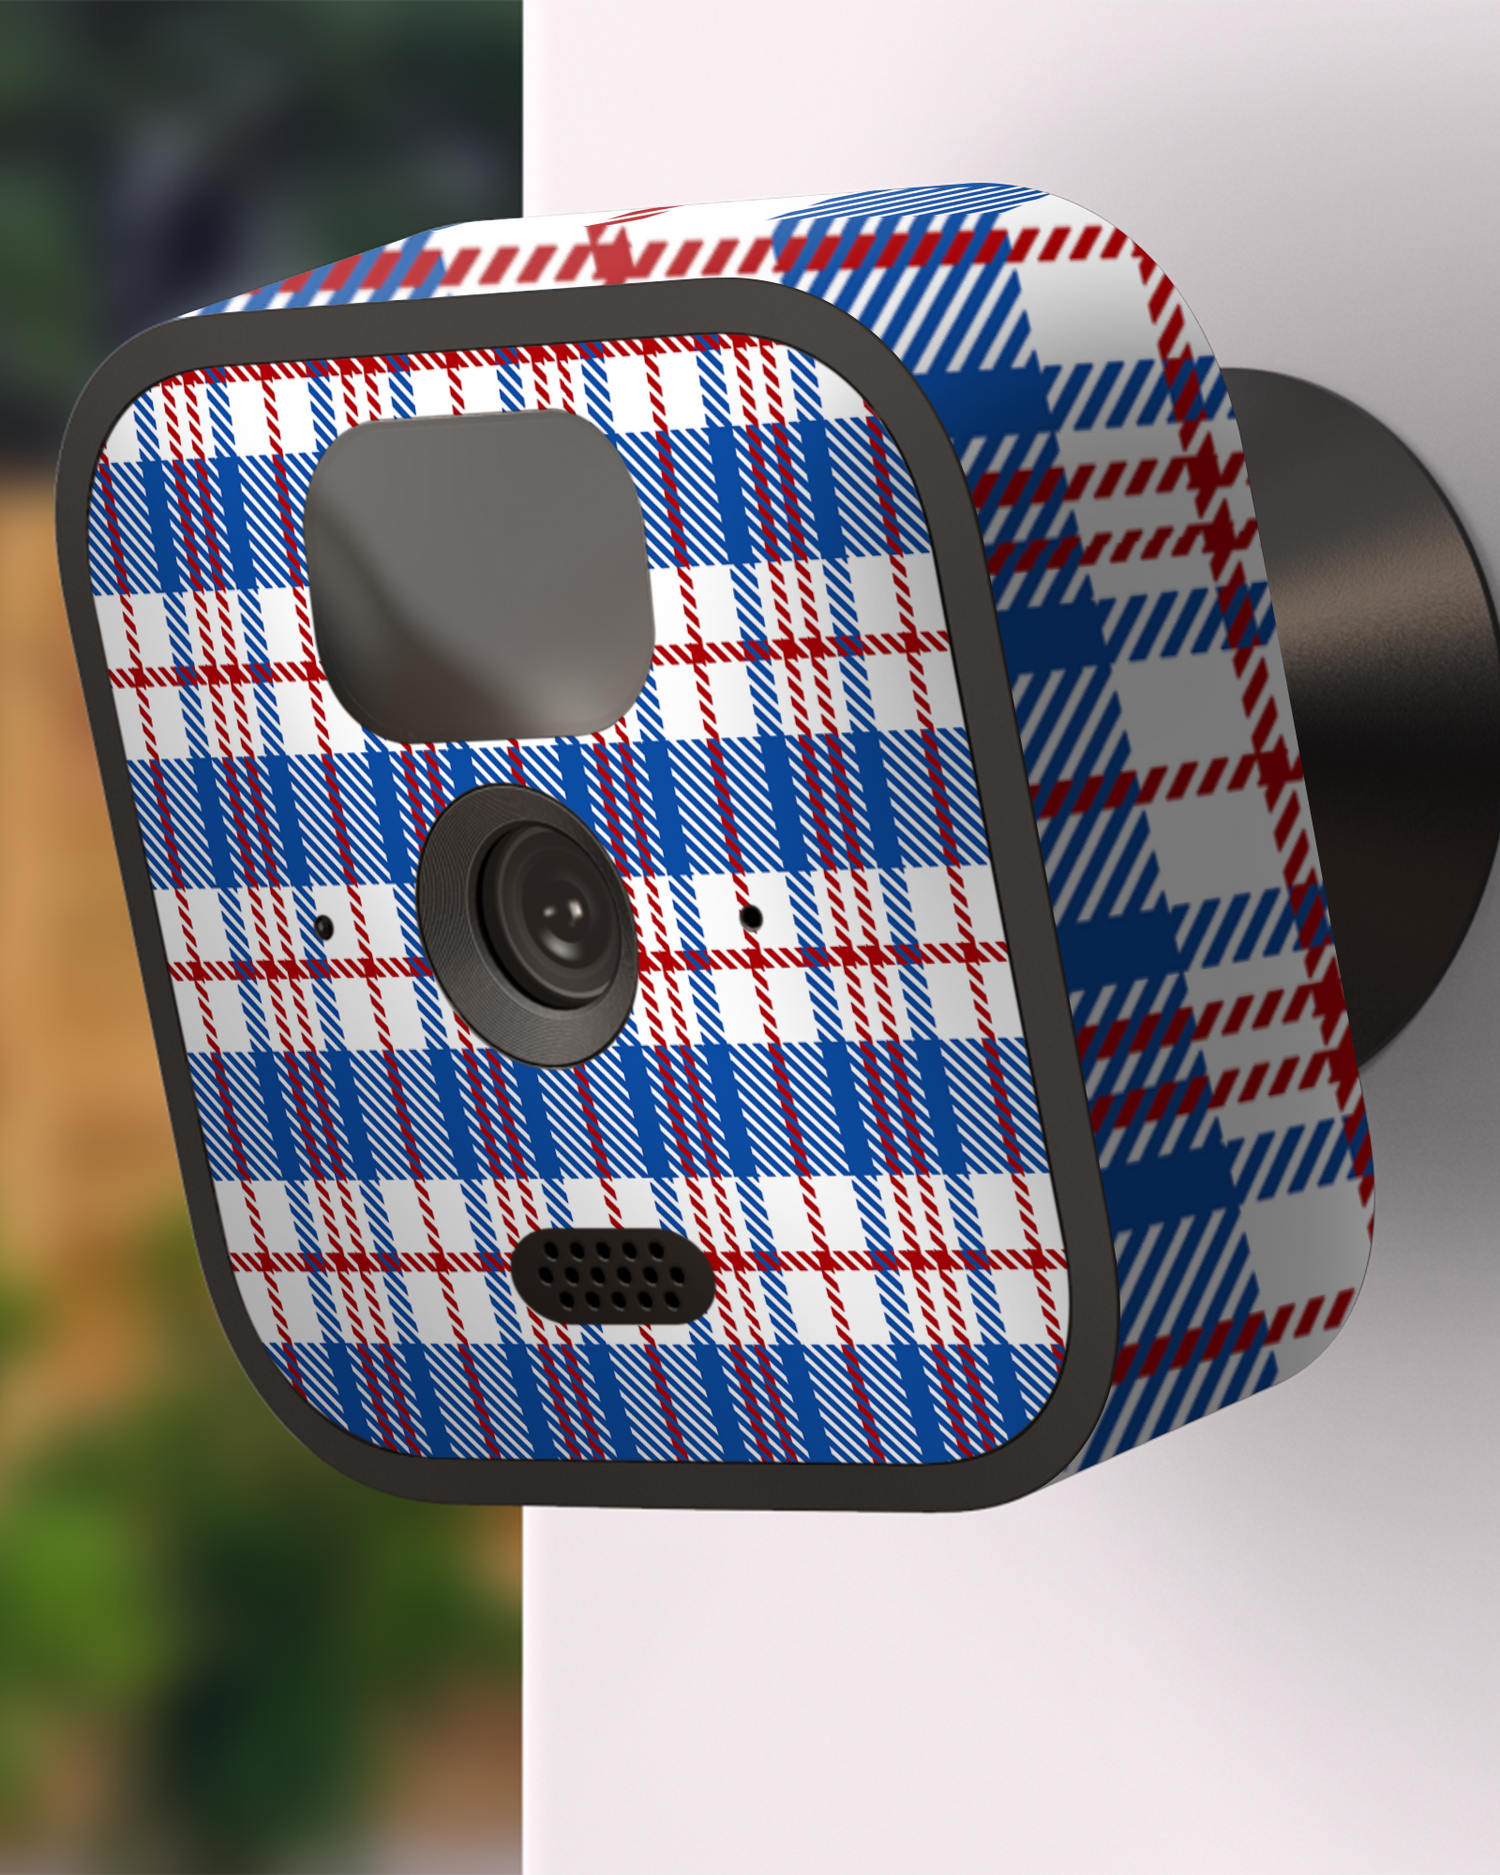 Plaid Market Bag Camera Skin Blink Outdoor (2020) attached to exterior wall